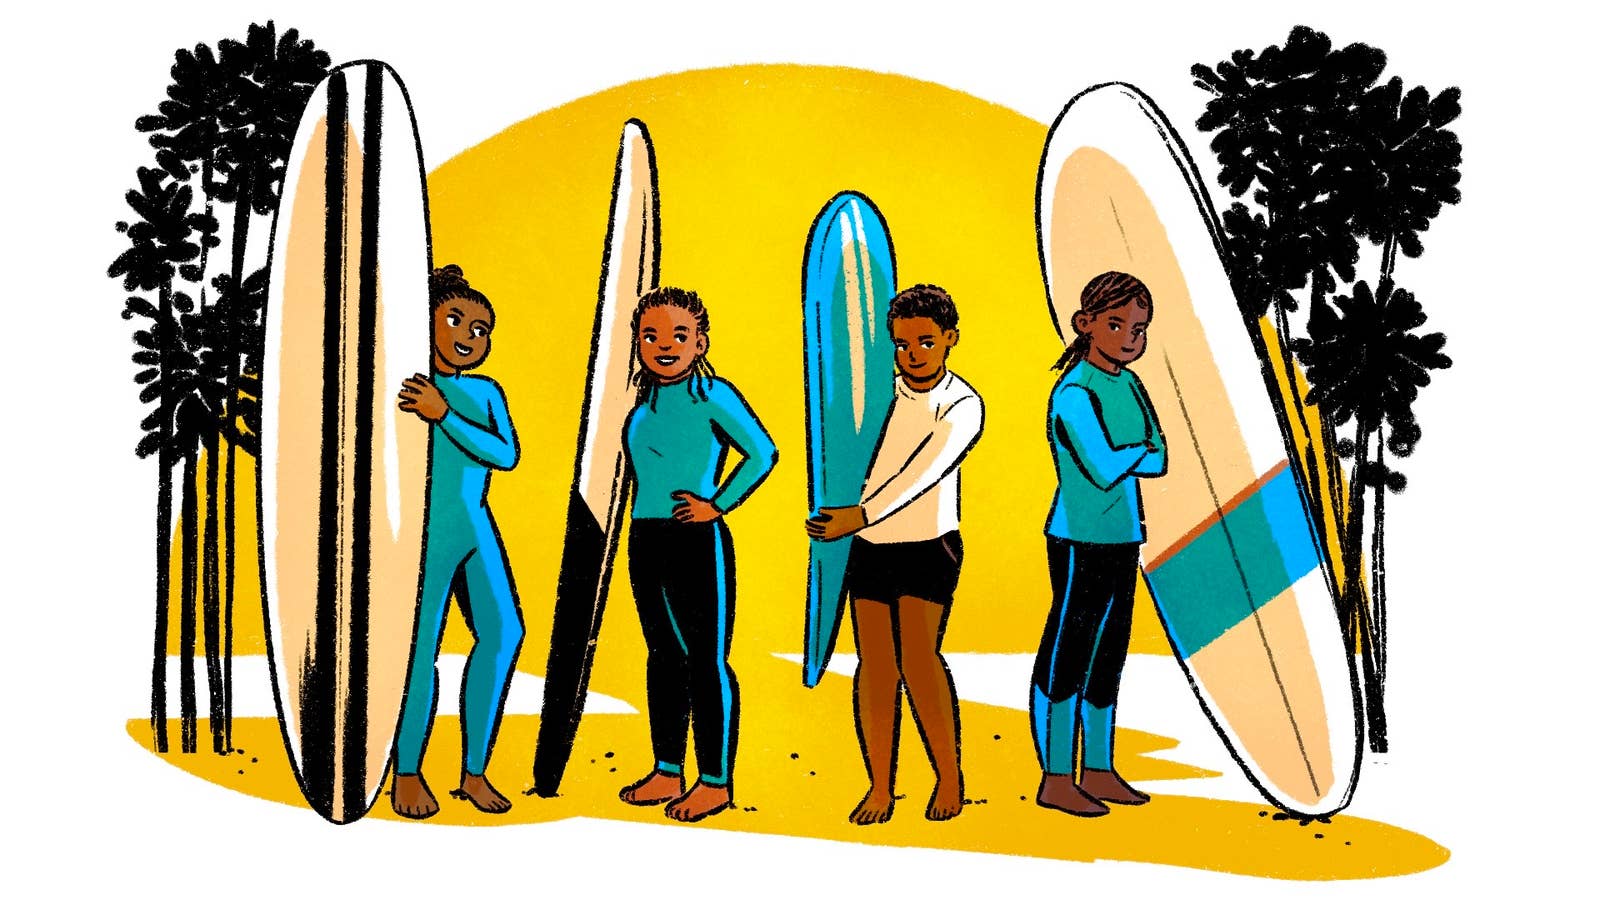 Hurley Partners with Black Girls Surf